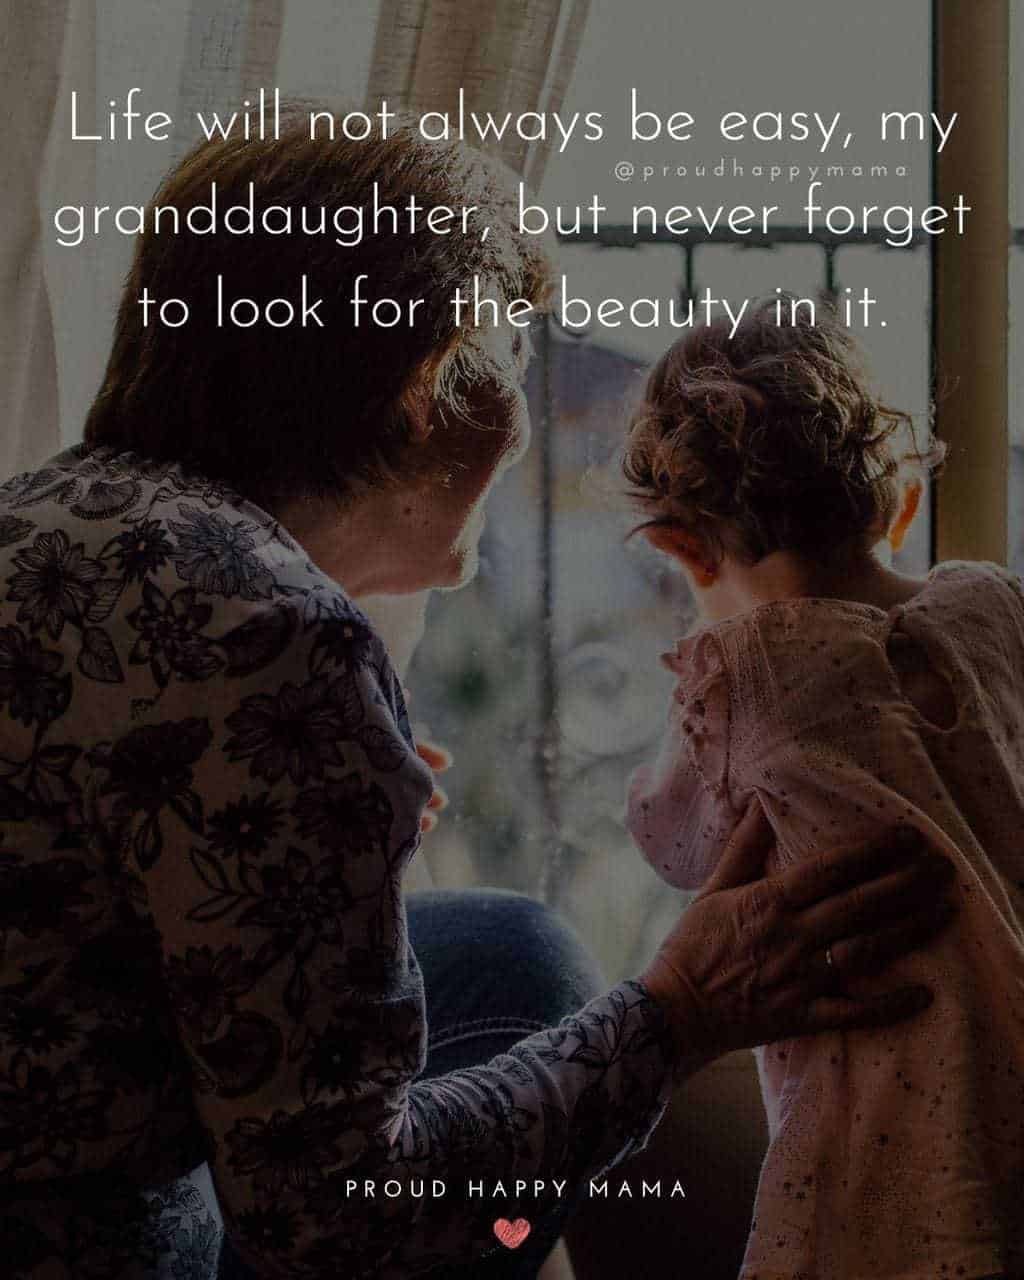 Granddaughter Quotes - Life will not always be easy, my granddaughter, but never forget to look for the beauty in it.’